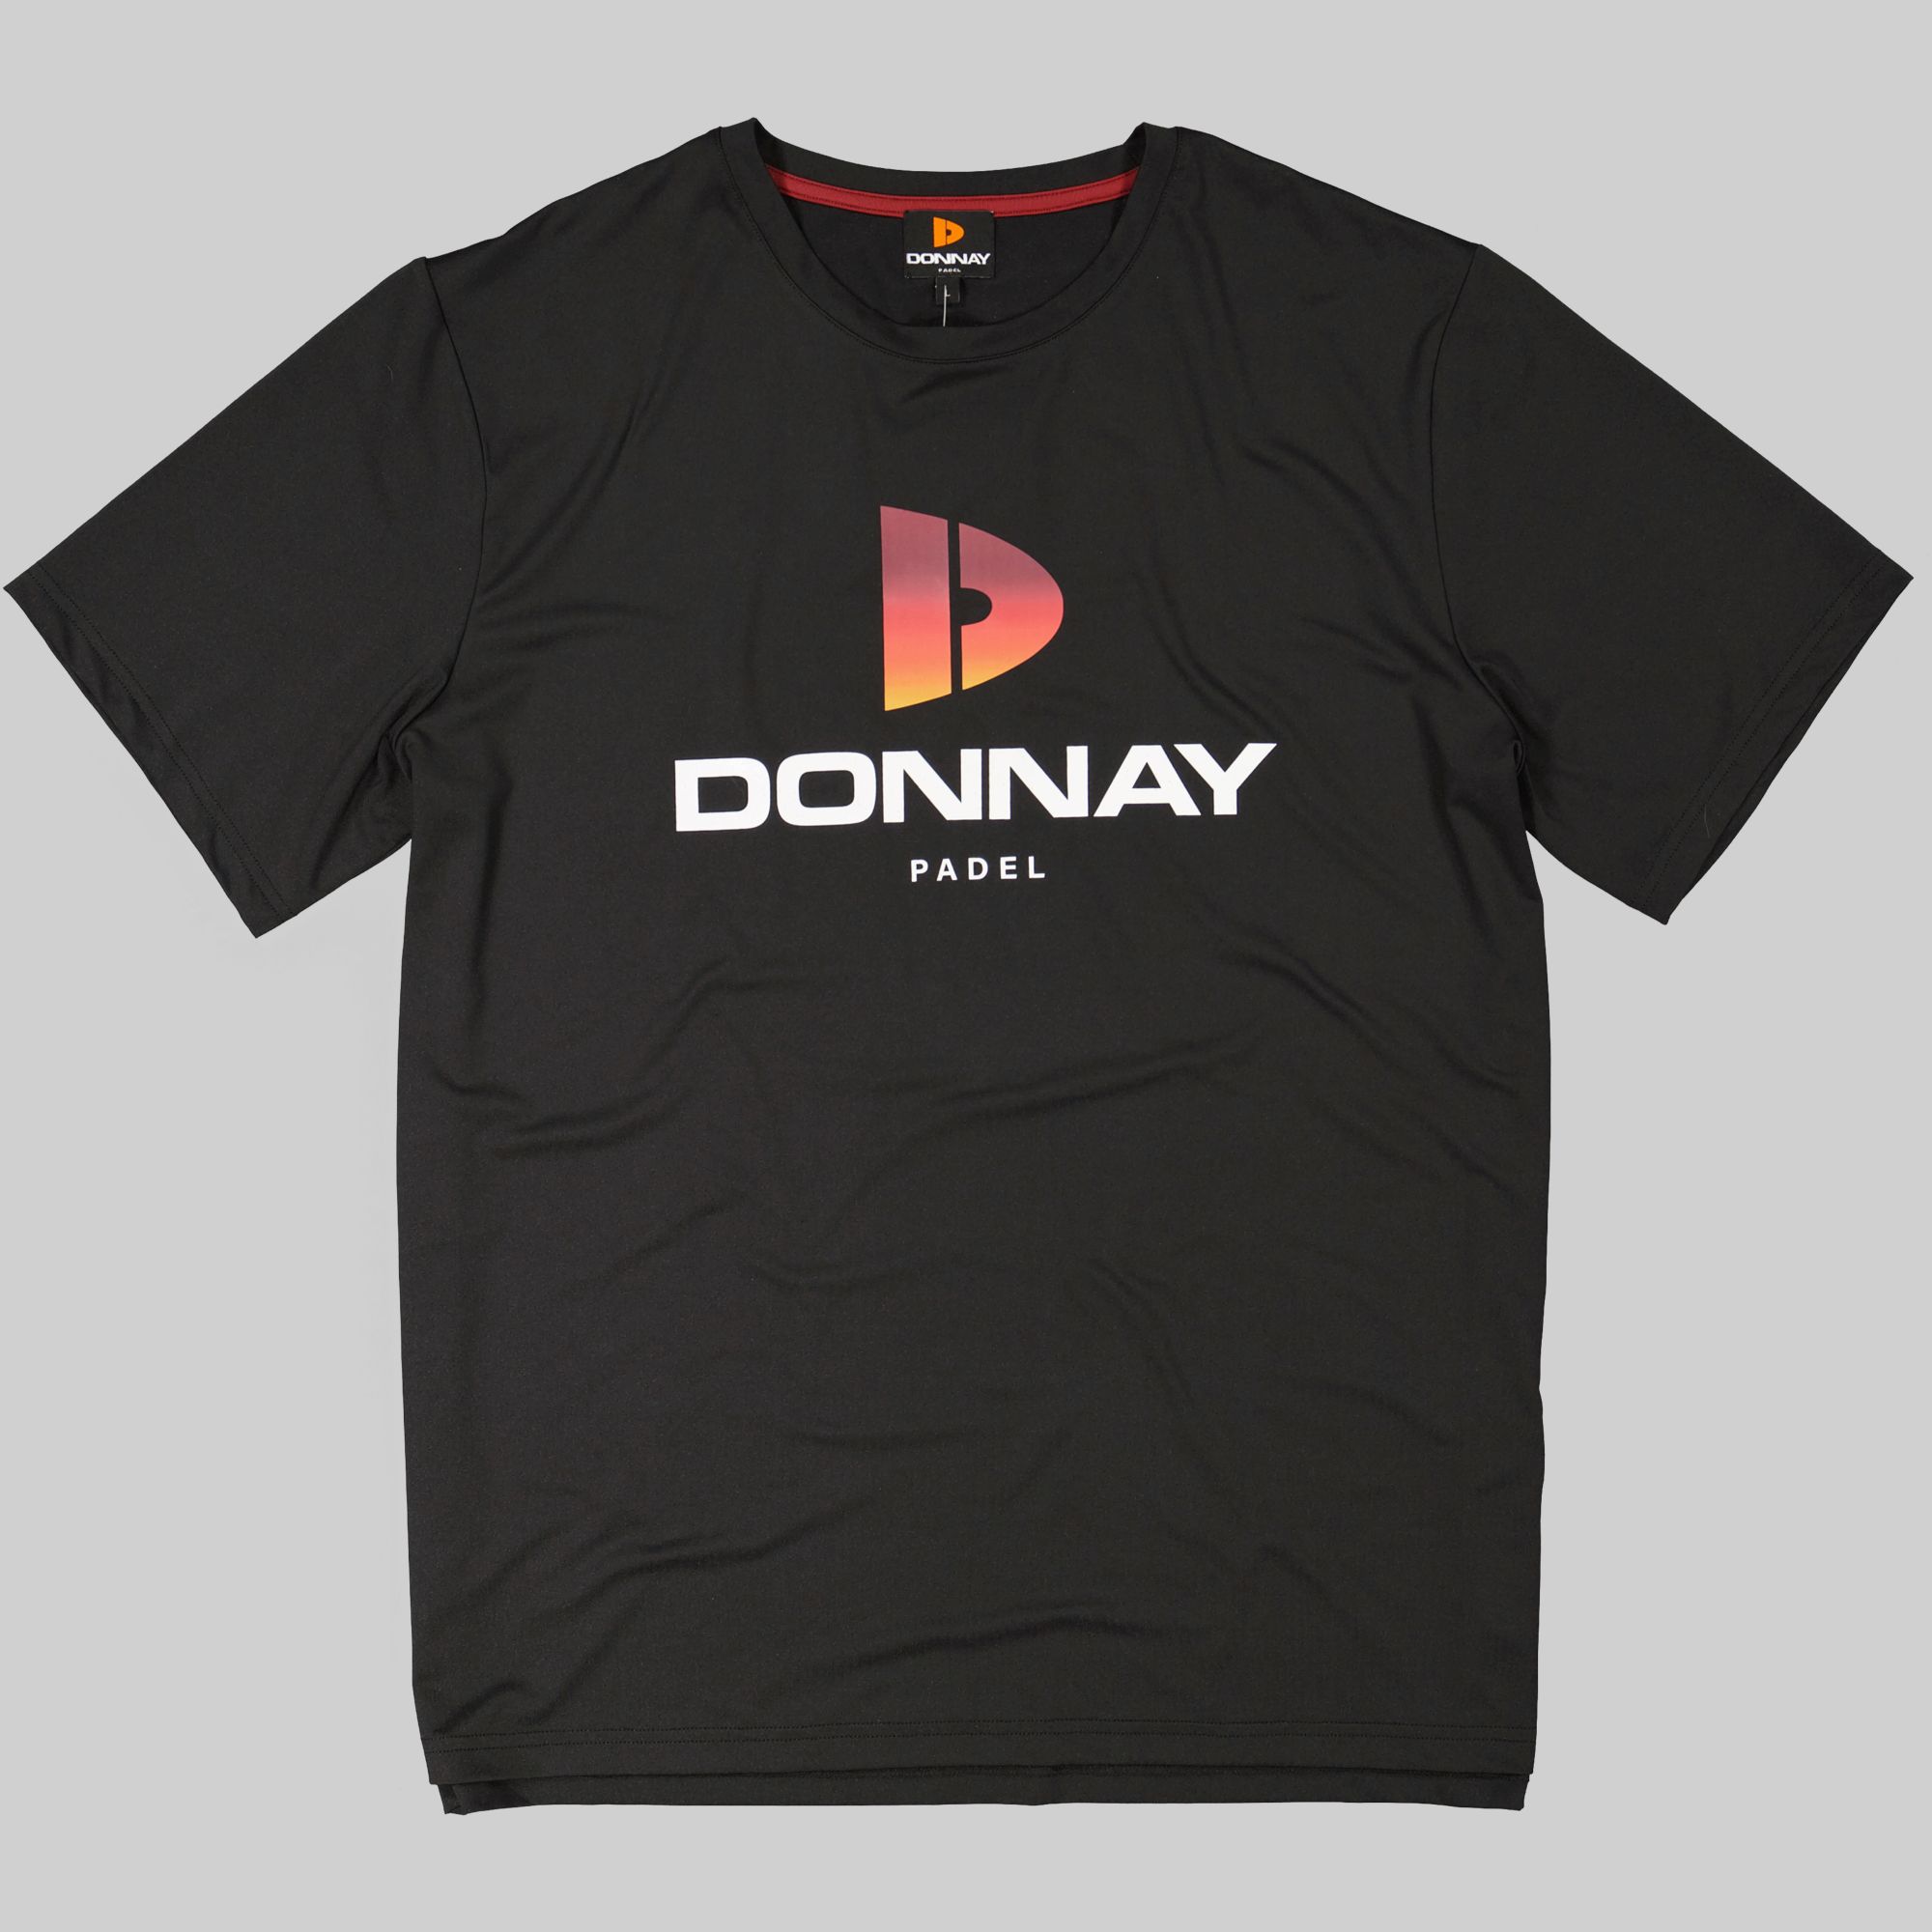 Donnay T-shirt